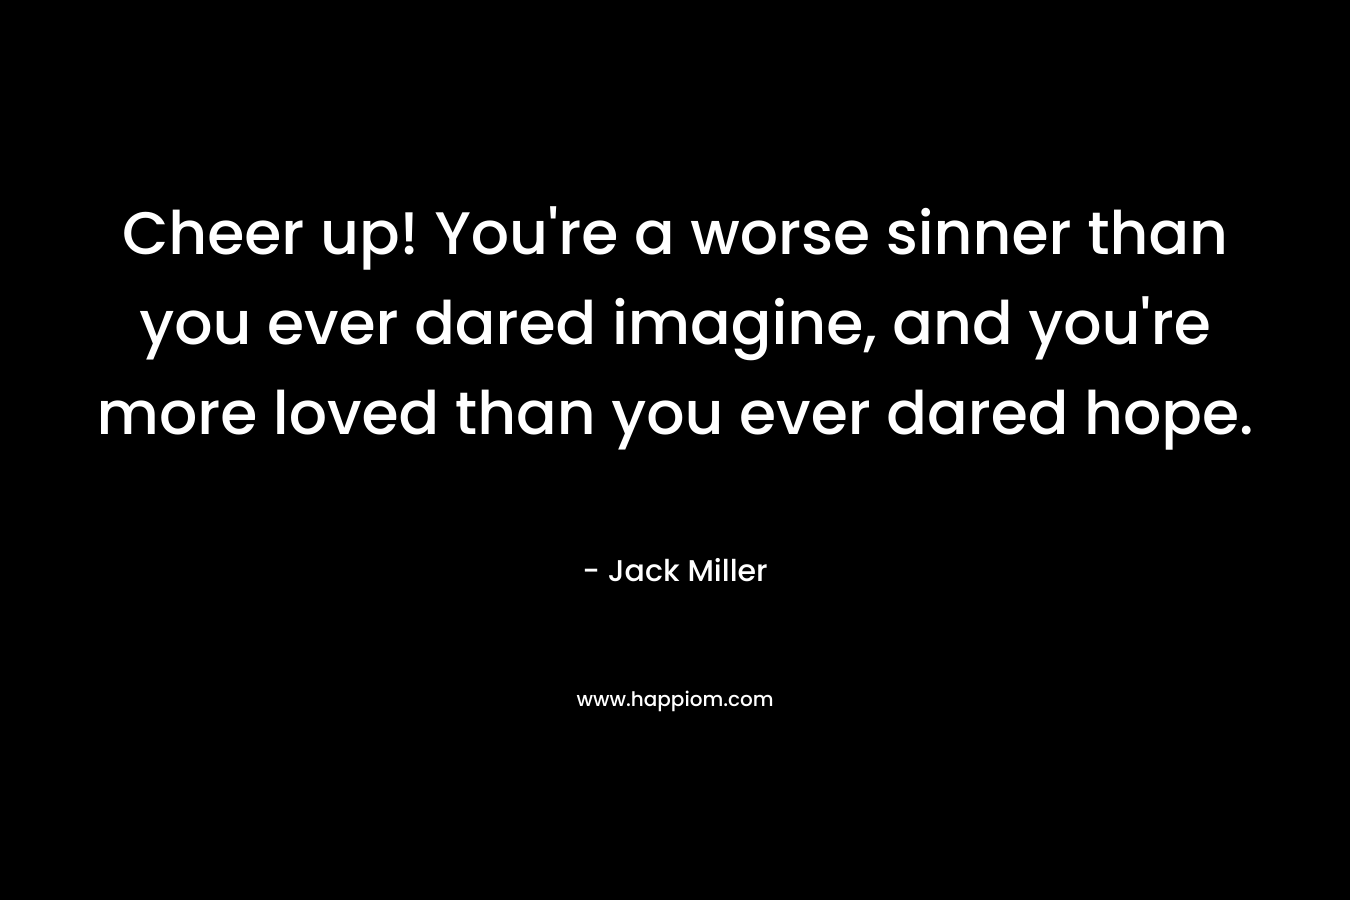 Cheer up! You’re a worse sinner than you ever dared imagine, and you’re more loved than you ever dared hope. – Jack Miller